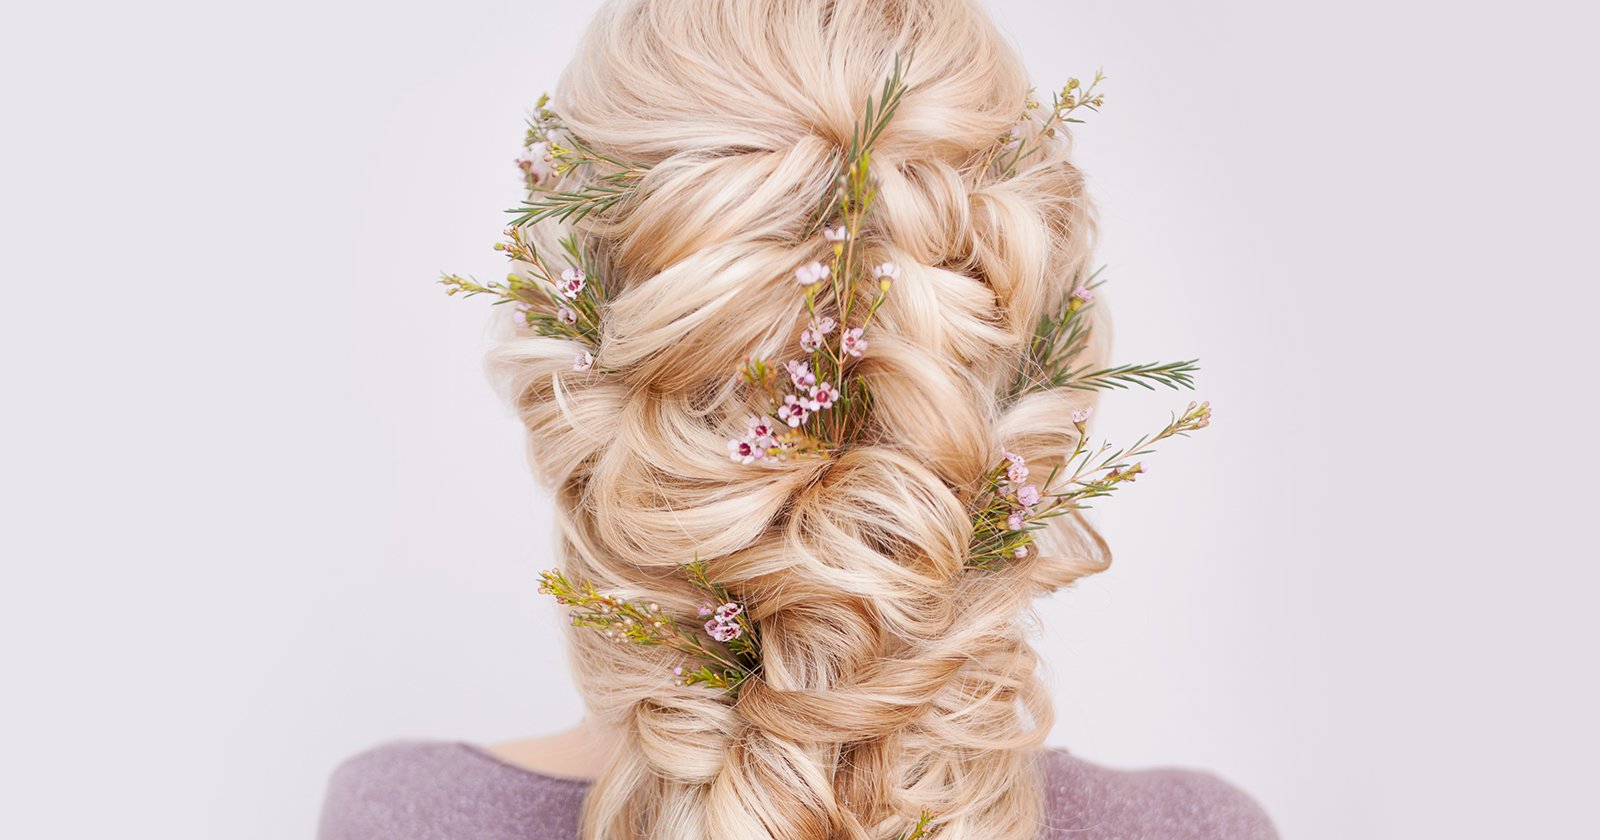 27 Effortlessly Beautiful Hairstyles For A Bohemian Wedding : Messy Updo  with Textured Braids